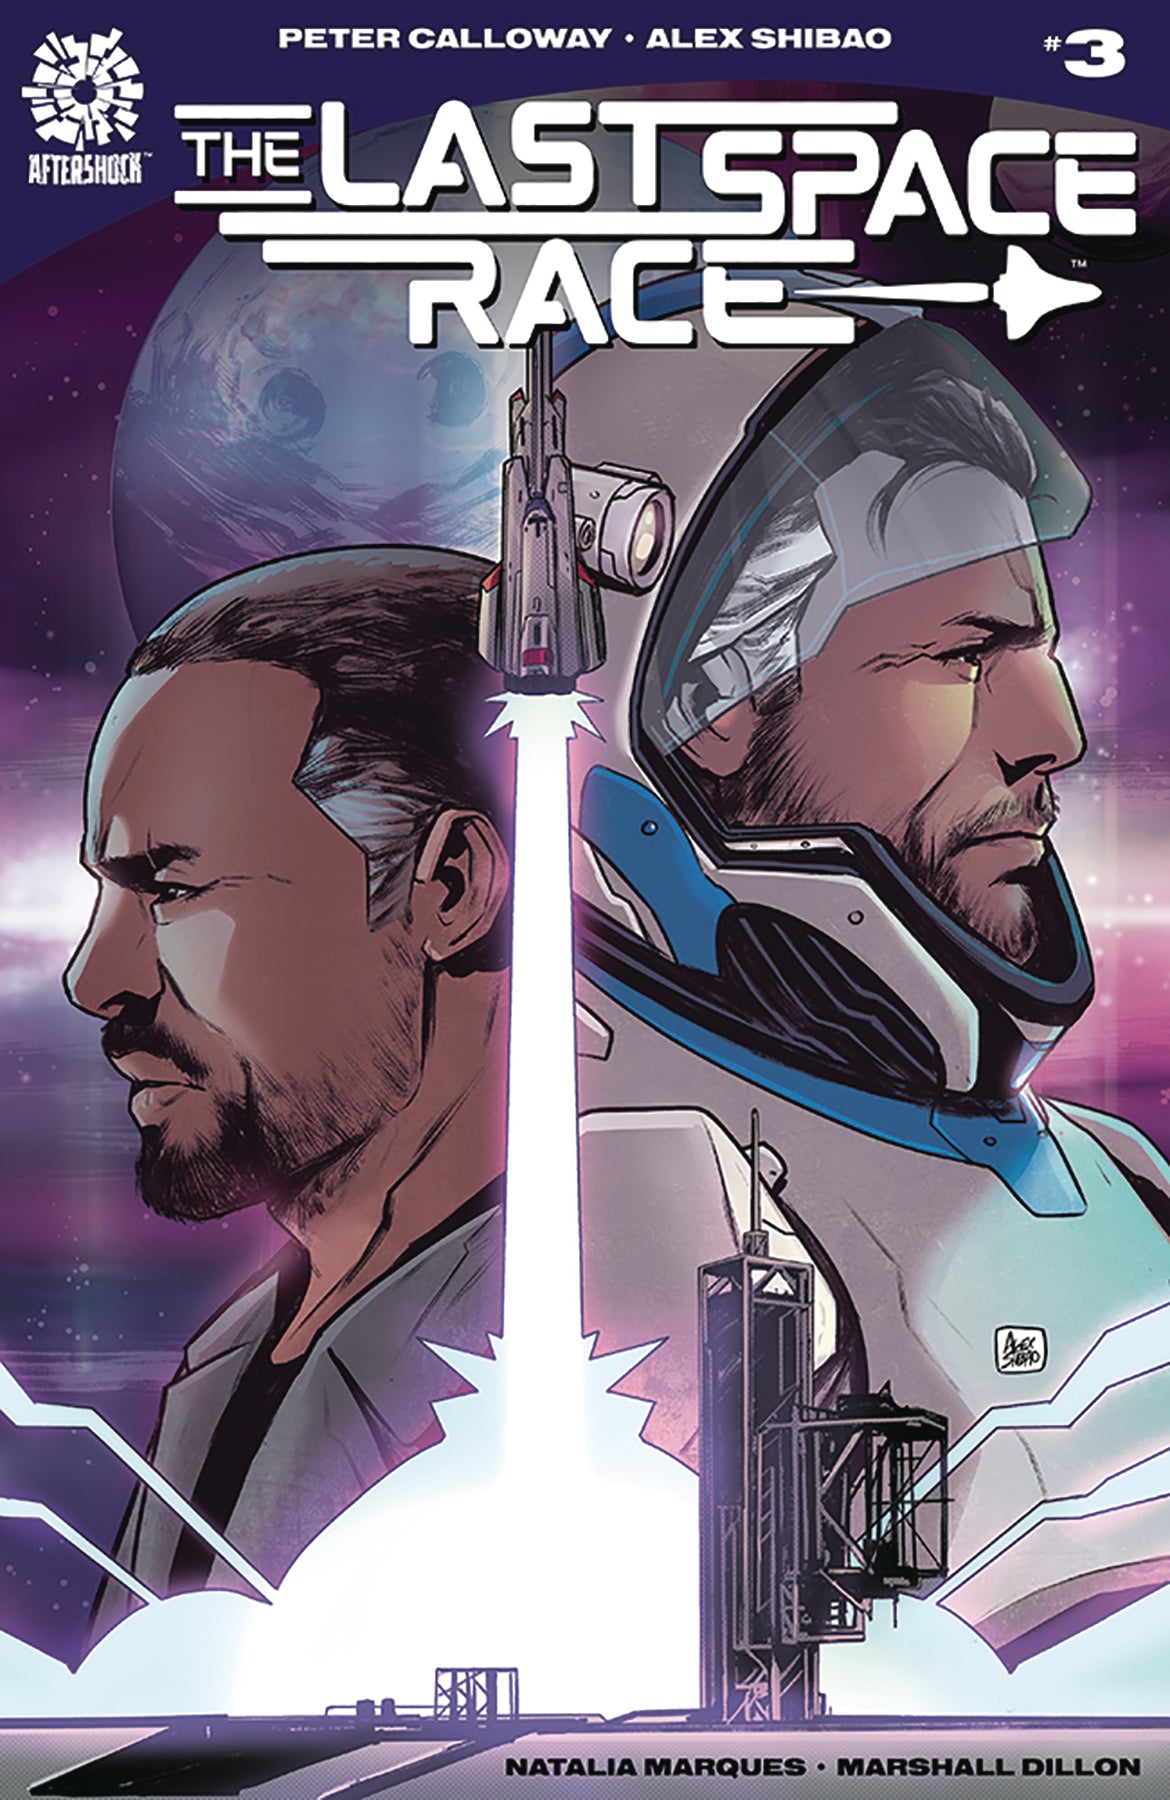 LAST SPACE RACE #3 COVER